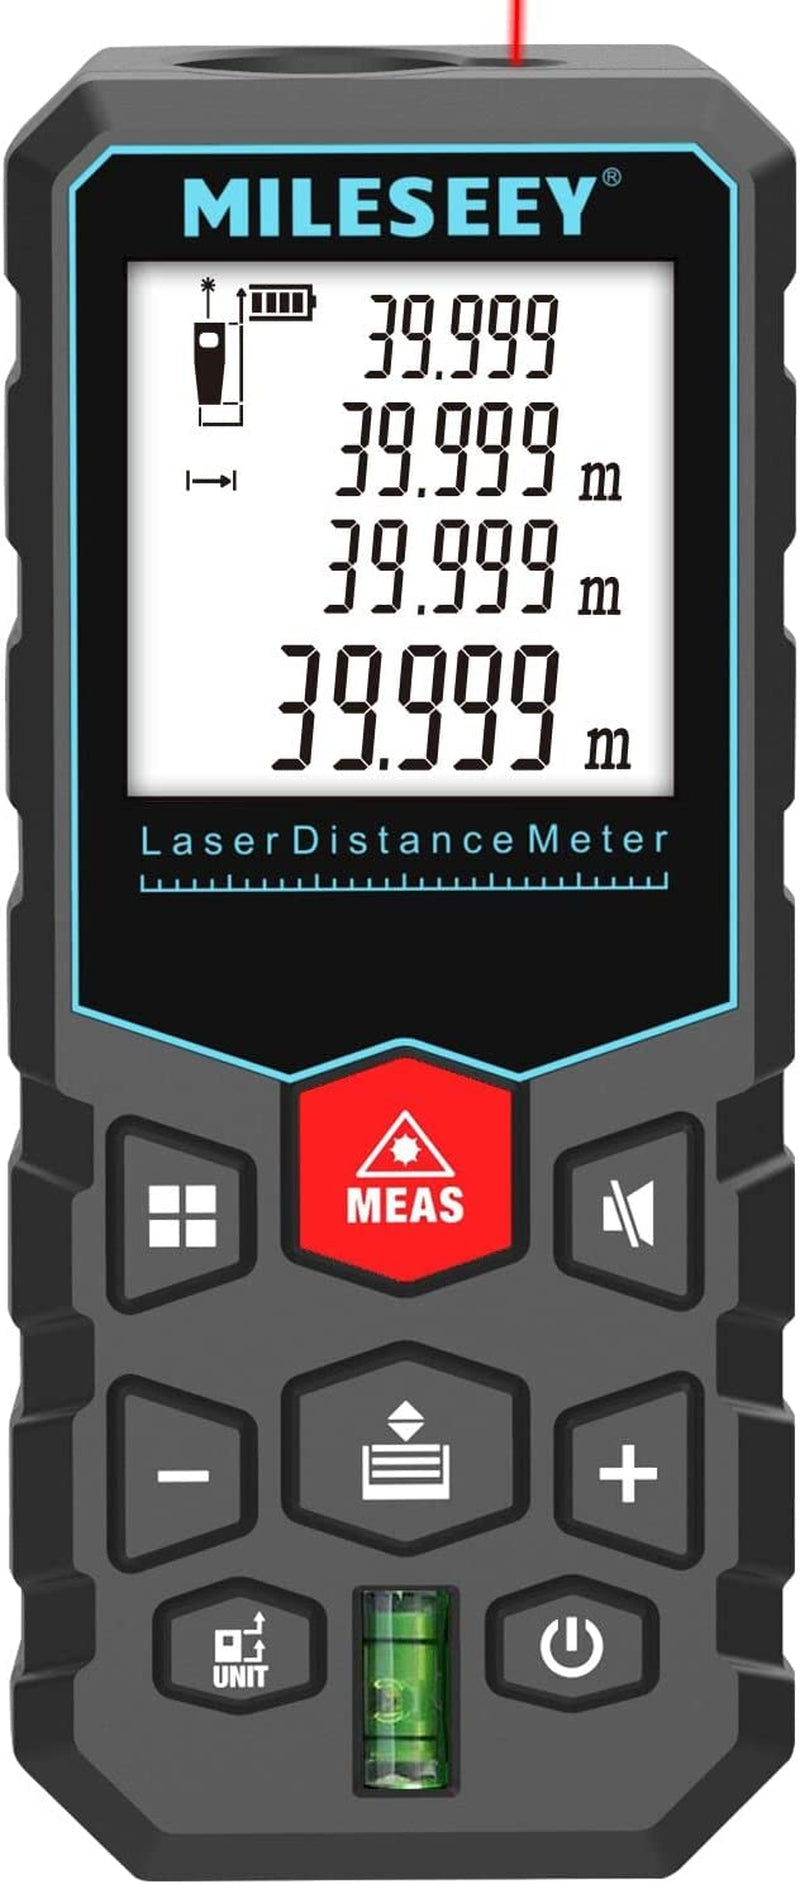 MiLESEEY, Mileseey Laser Measure, Laser Tape Measure,±2Mm Accuracy Digital Tape Measure with Area, Volume Measurement,Lcd Backlit,Mute Function, IP54, Battery Included